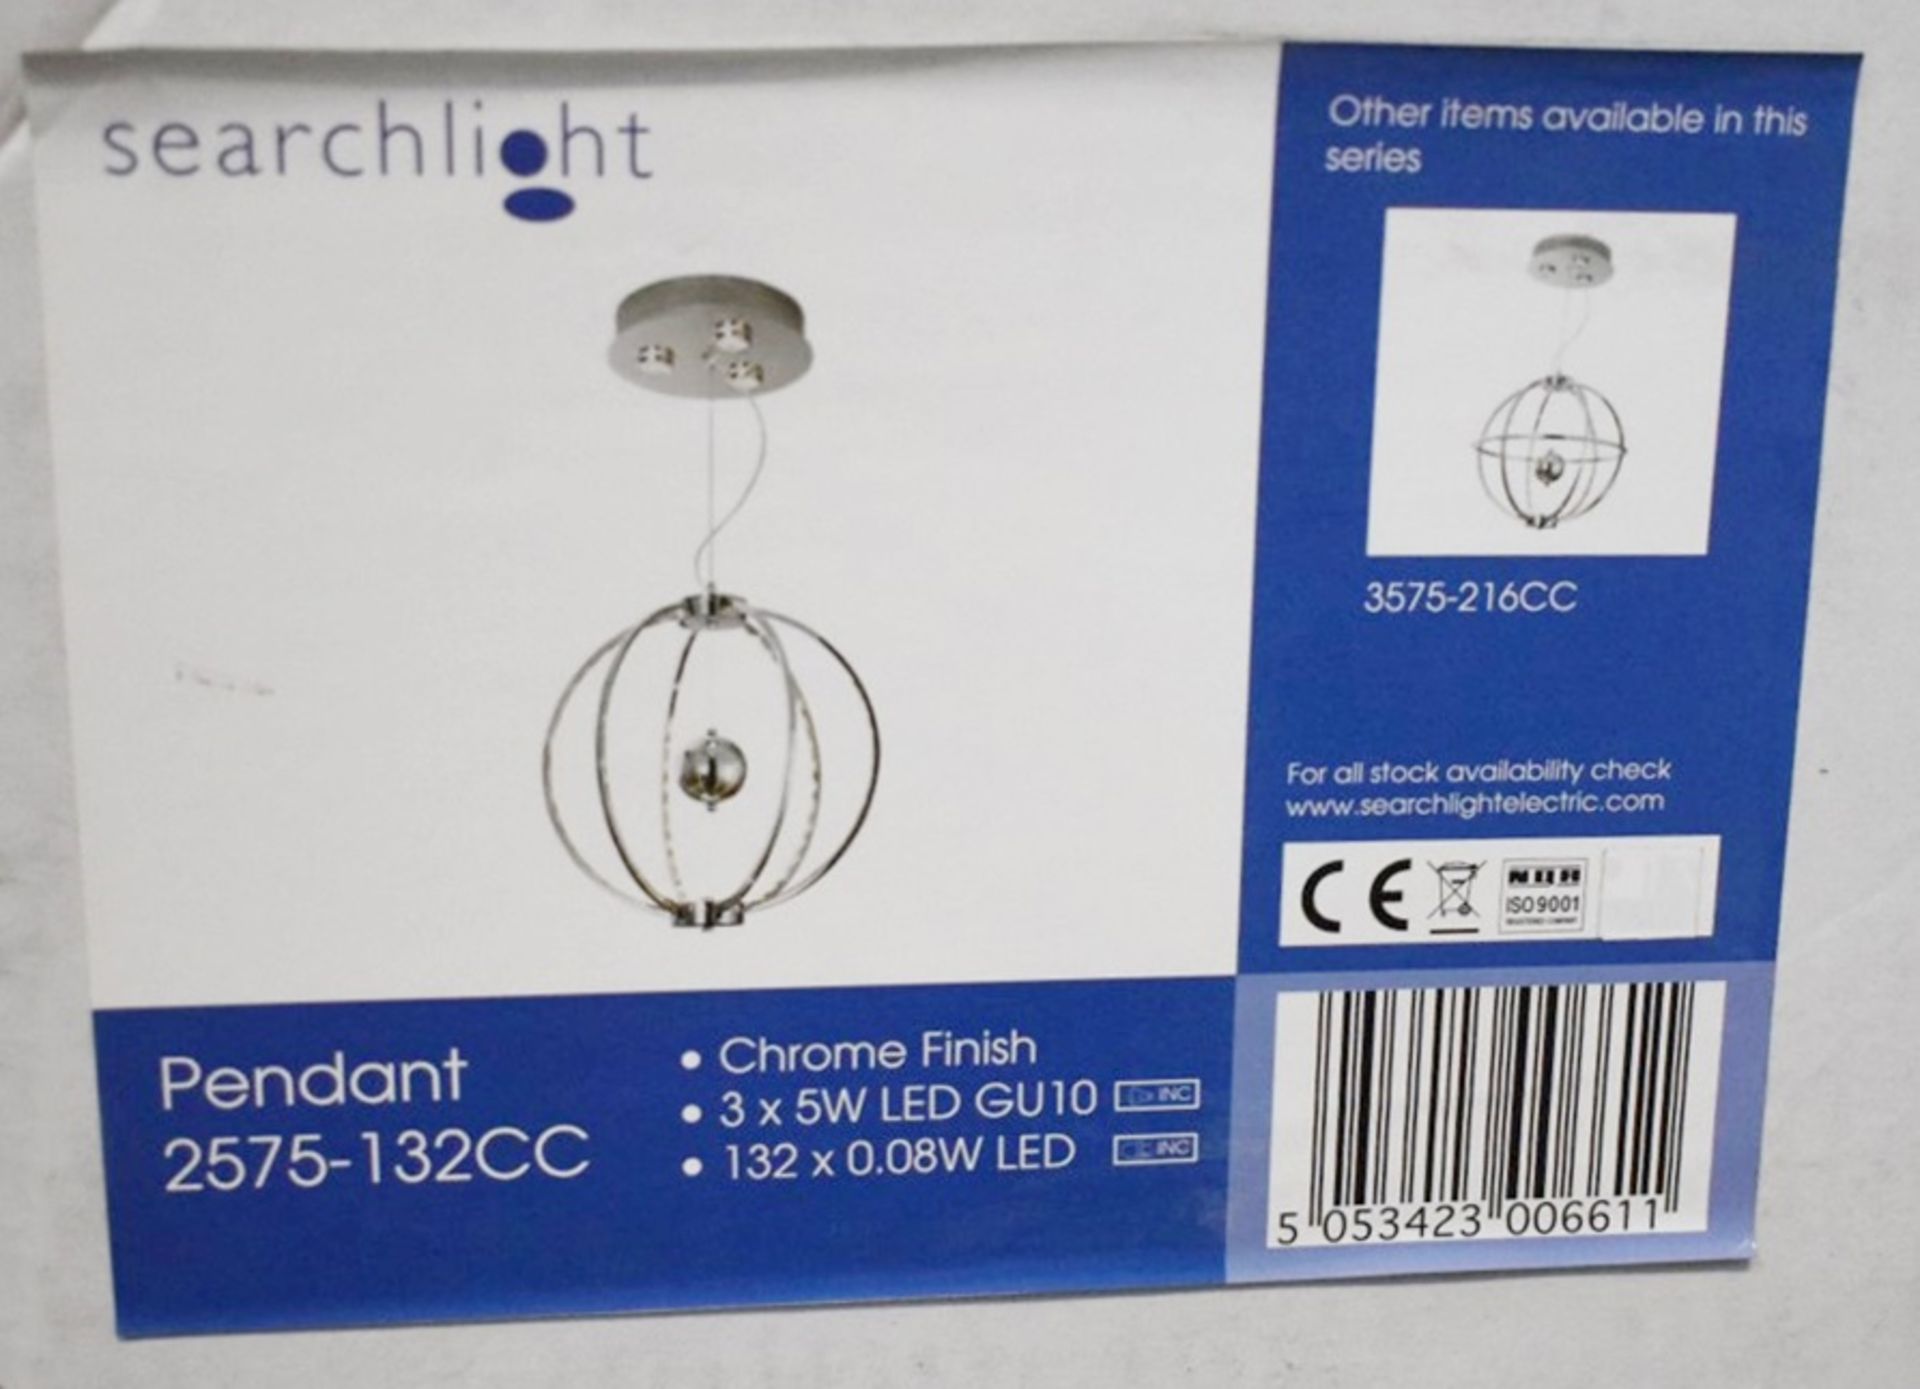 1 x Searchlight Gyro LED Small Ceiling Pendant, Polished Chrome - New Boxed Stock - Ref: 2575-132CC - Image 2 of 3